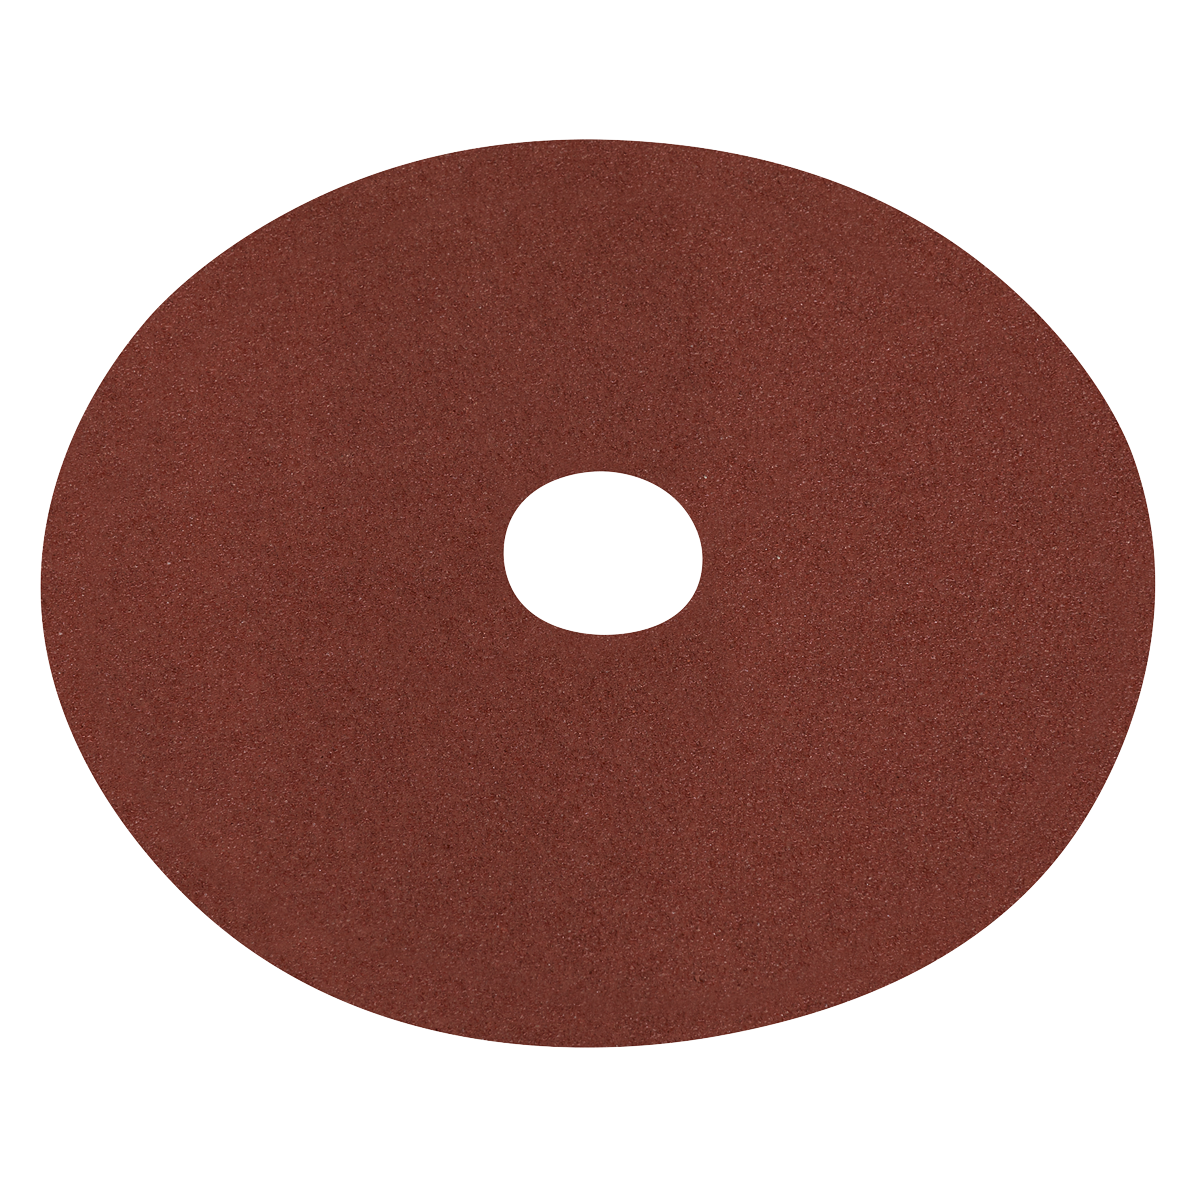 Fibre Backed Disc Ø125mm - 60Grit Pack of 25 - WSD560 - Farming Parts